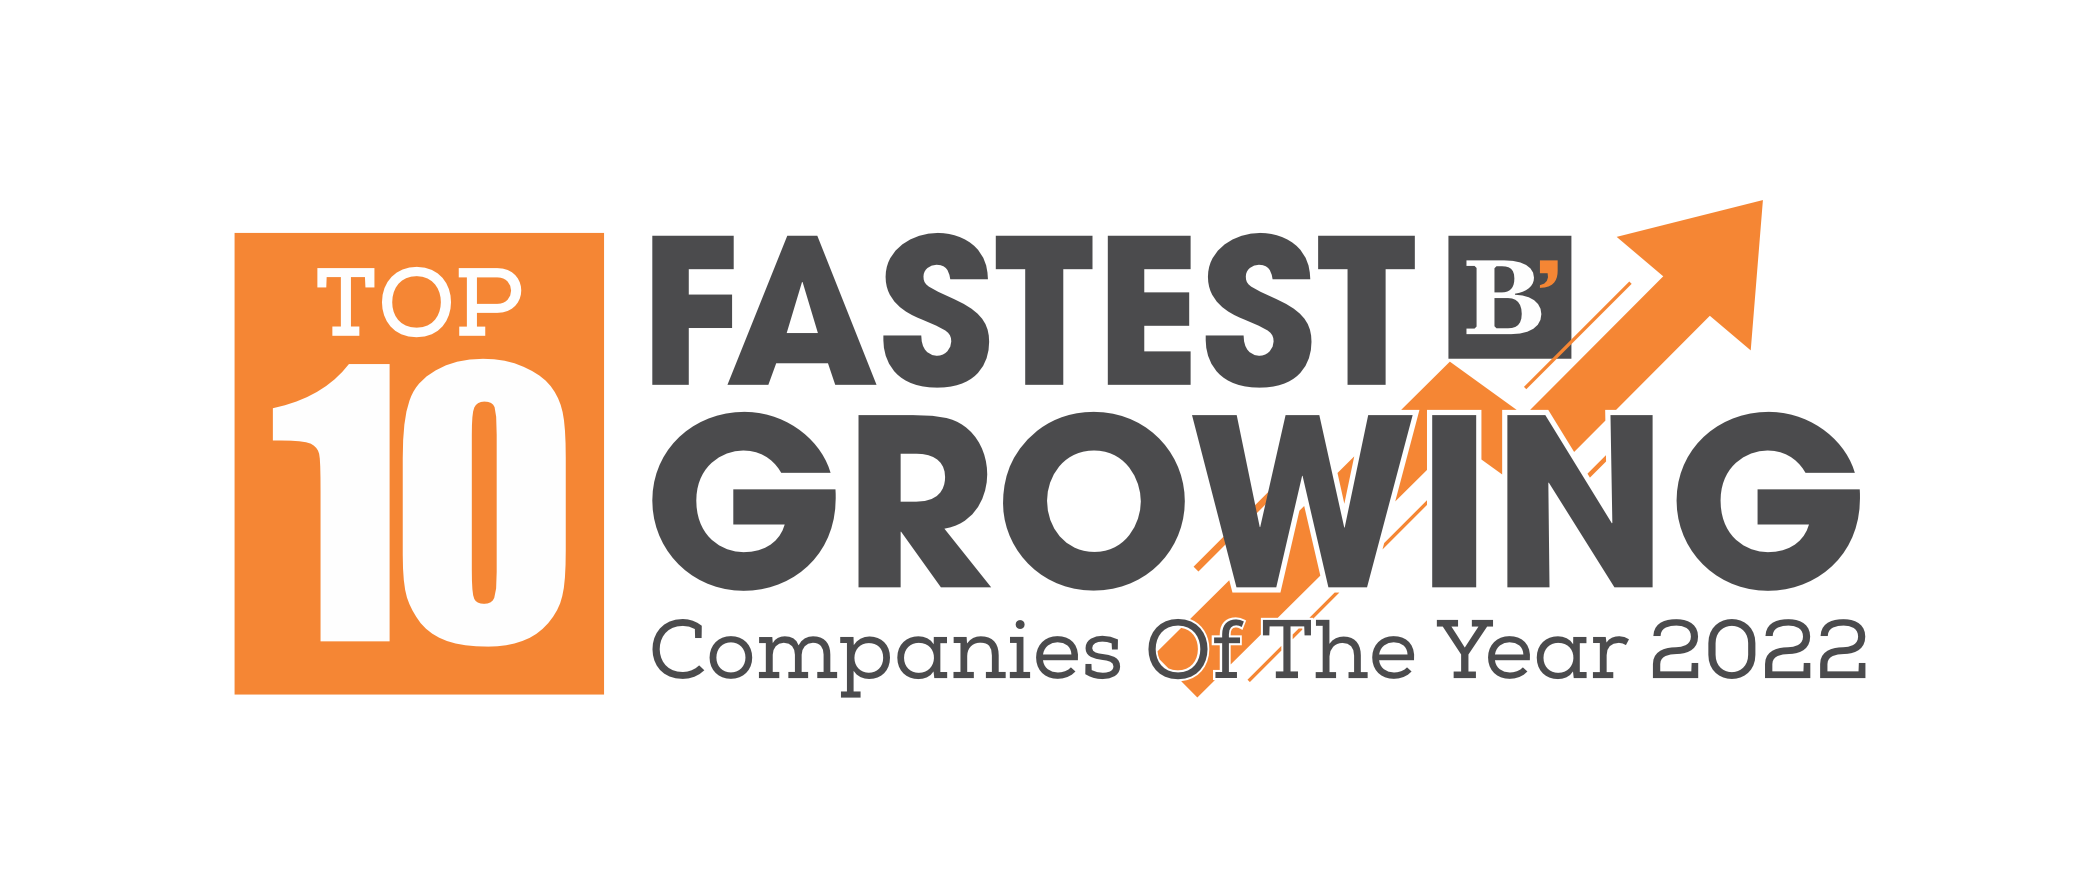 Top 10 Fastest Growing Companies Of The Year 2022